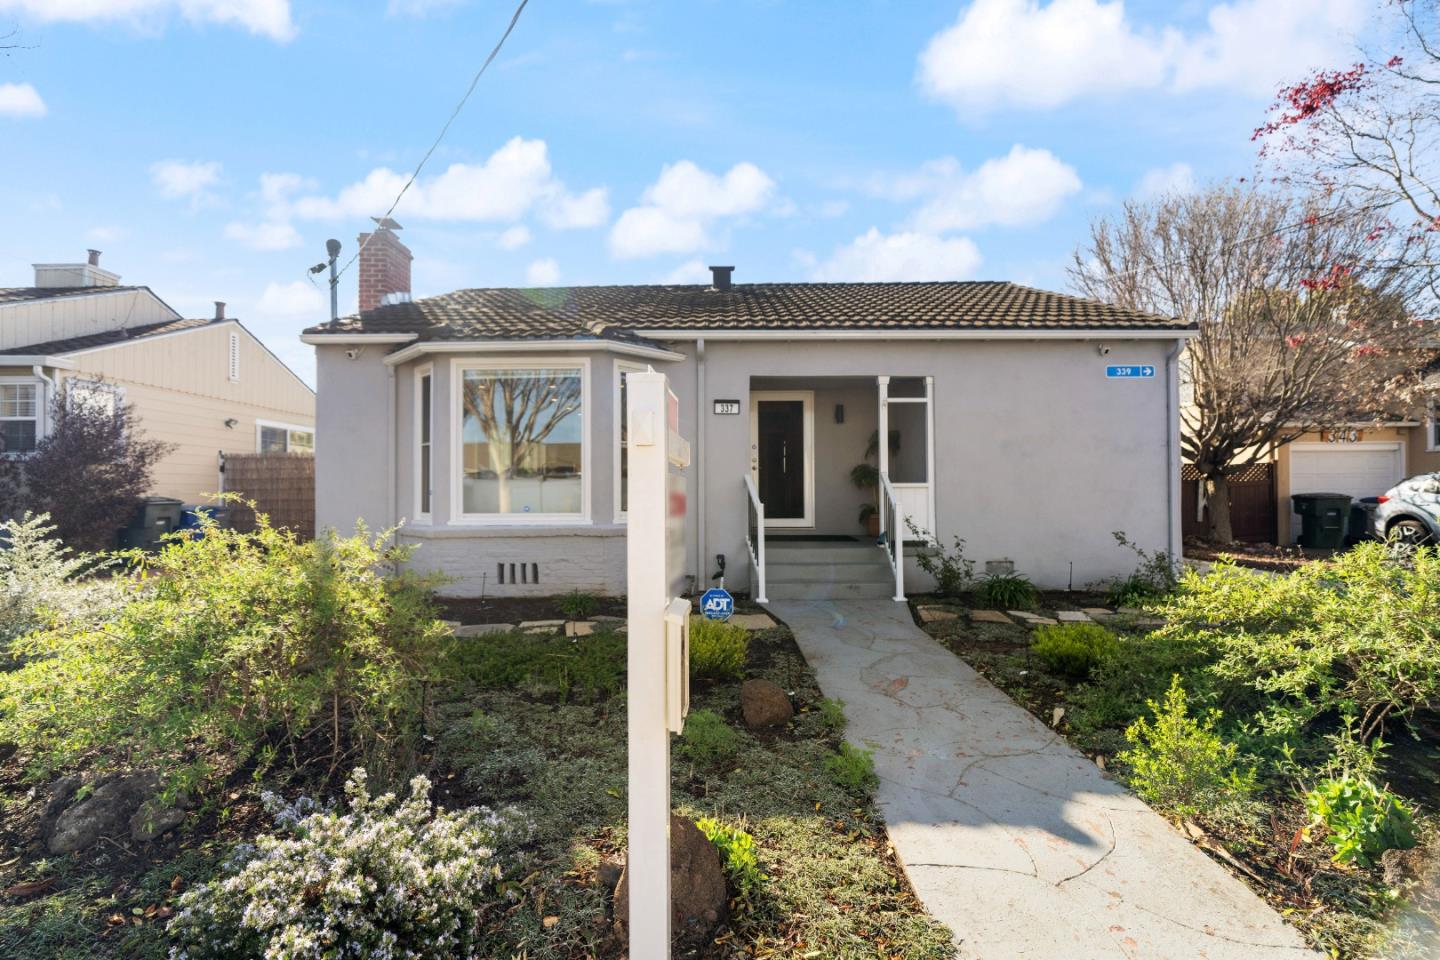 Photo of 337 Farrelly Dr in San Leandro, CA